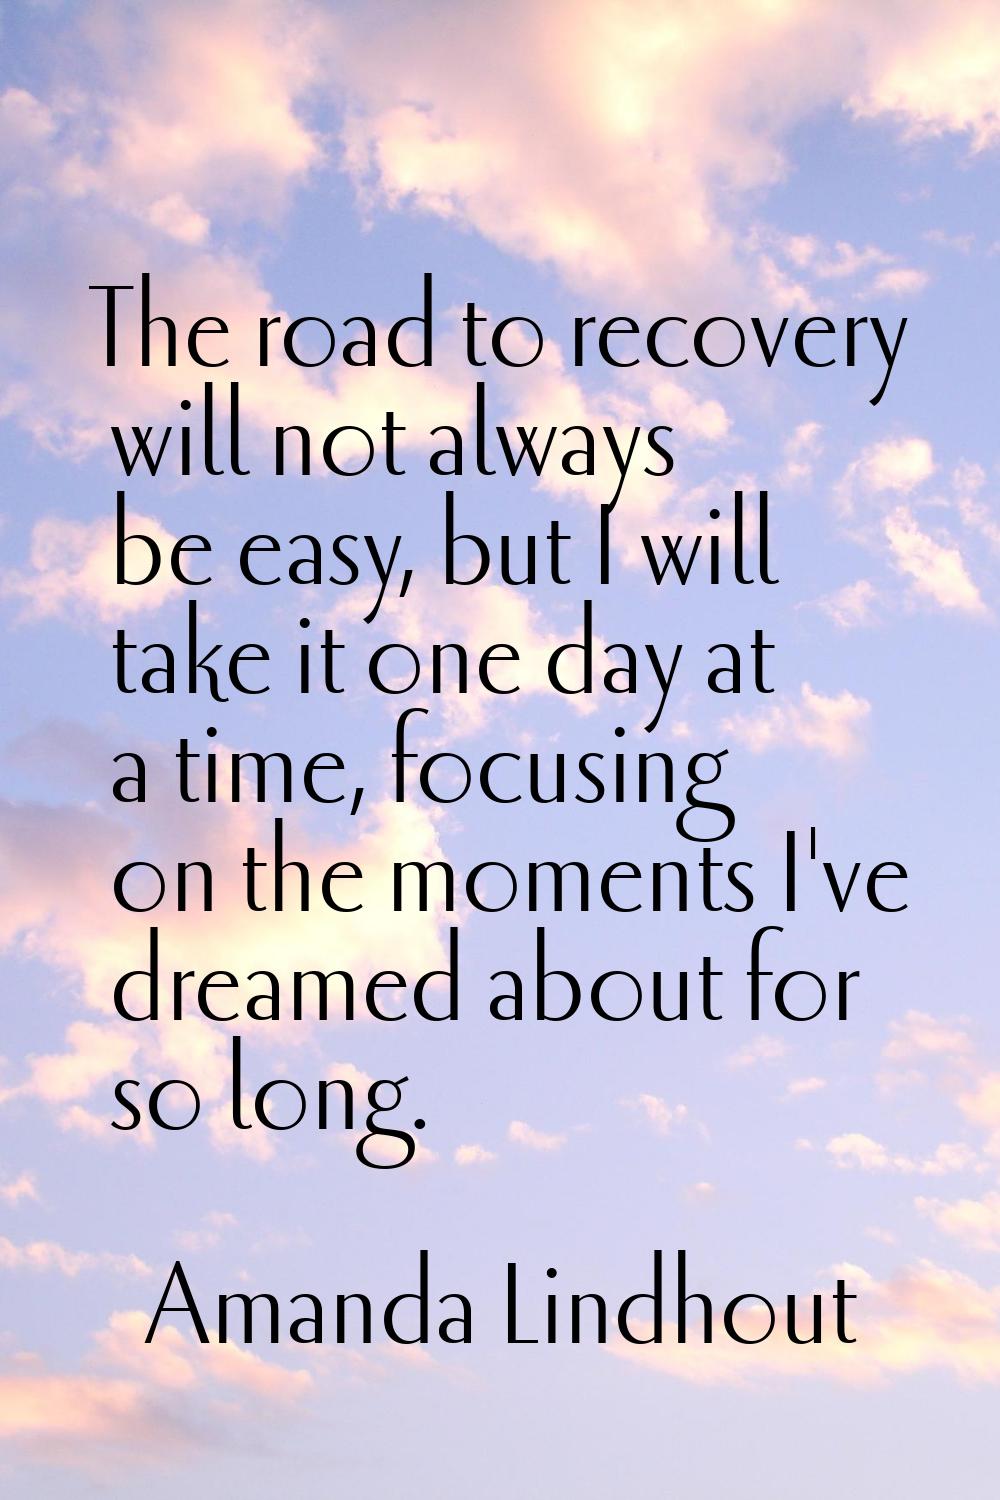 The road to recovery will not always be easy, but I will take it one day at a time, focusing on the